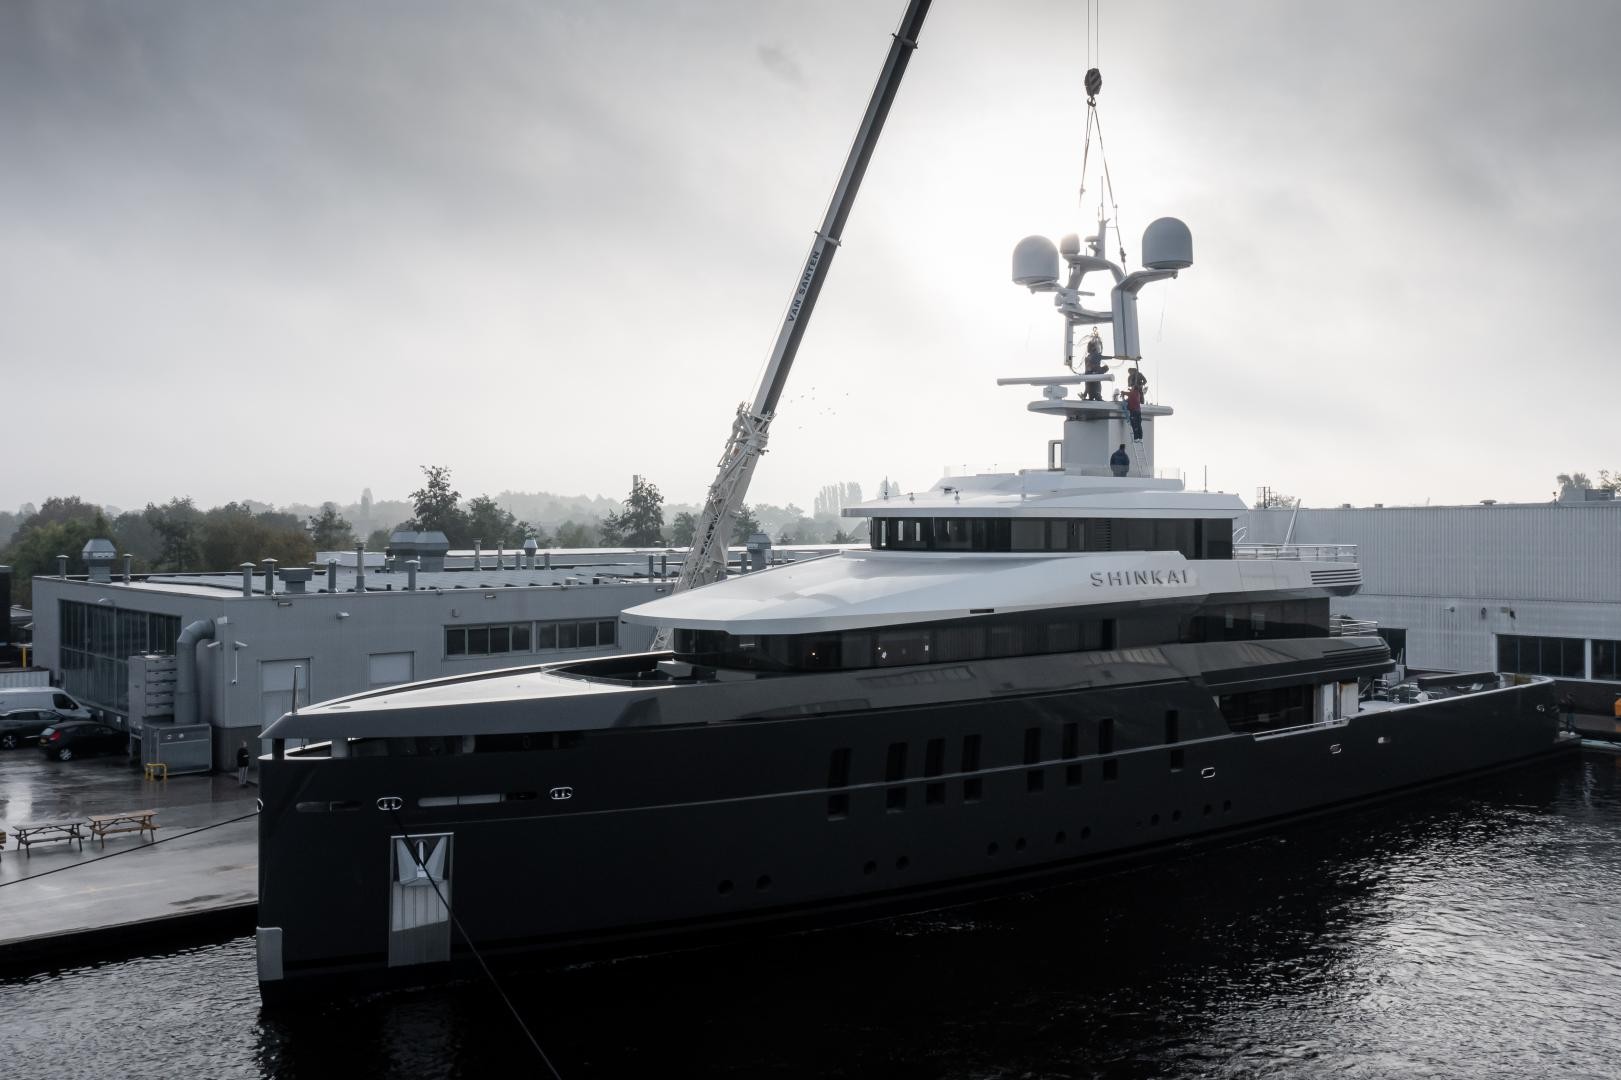 Philippe Briand’s no compromise onboard the 55m Feadship Shinkai